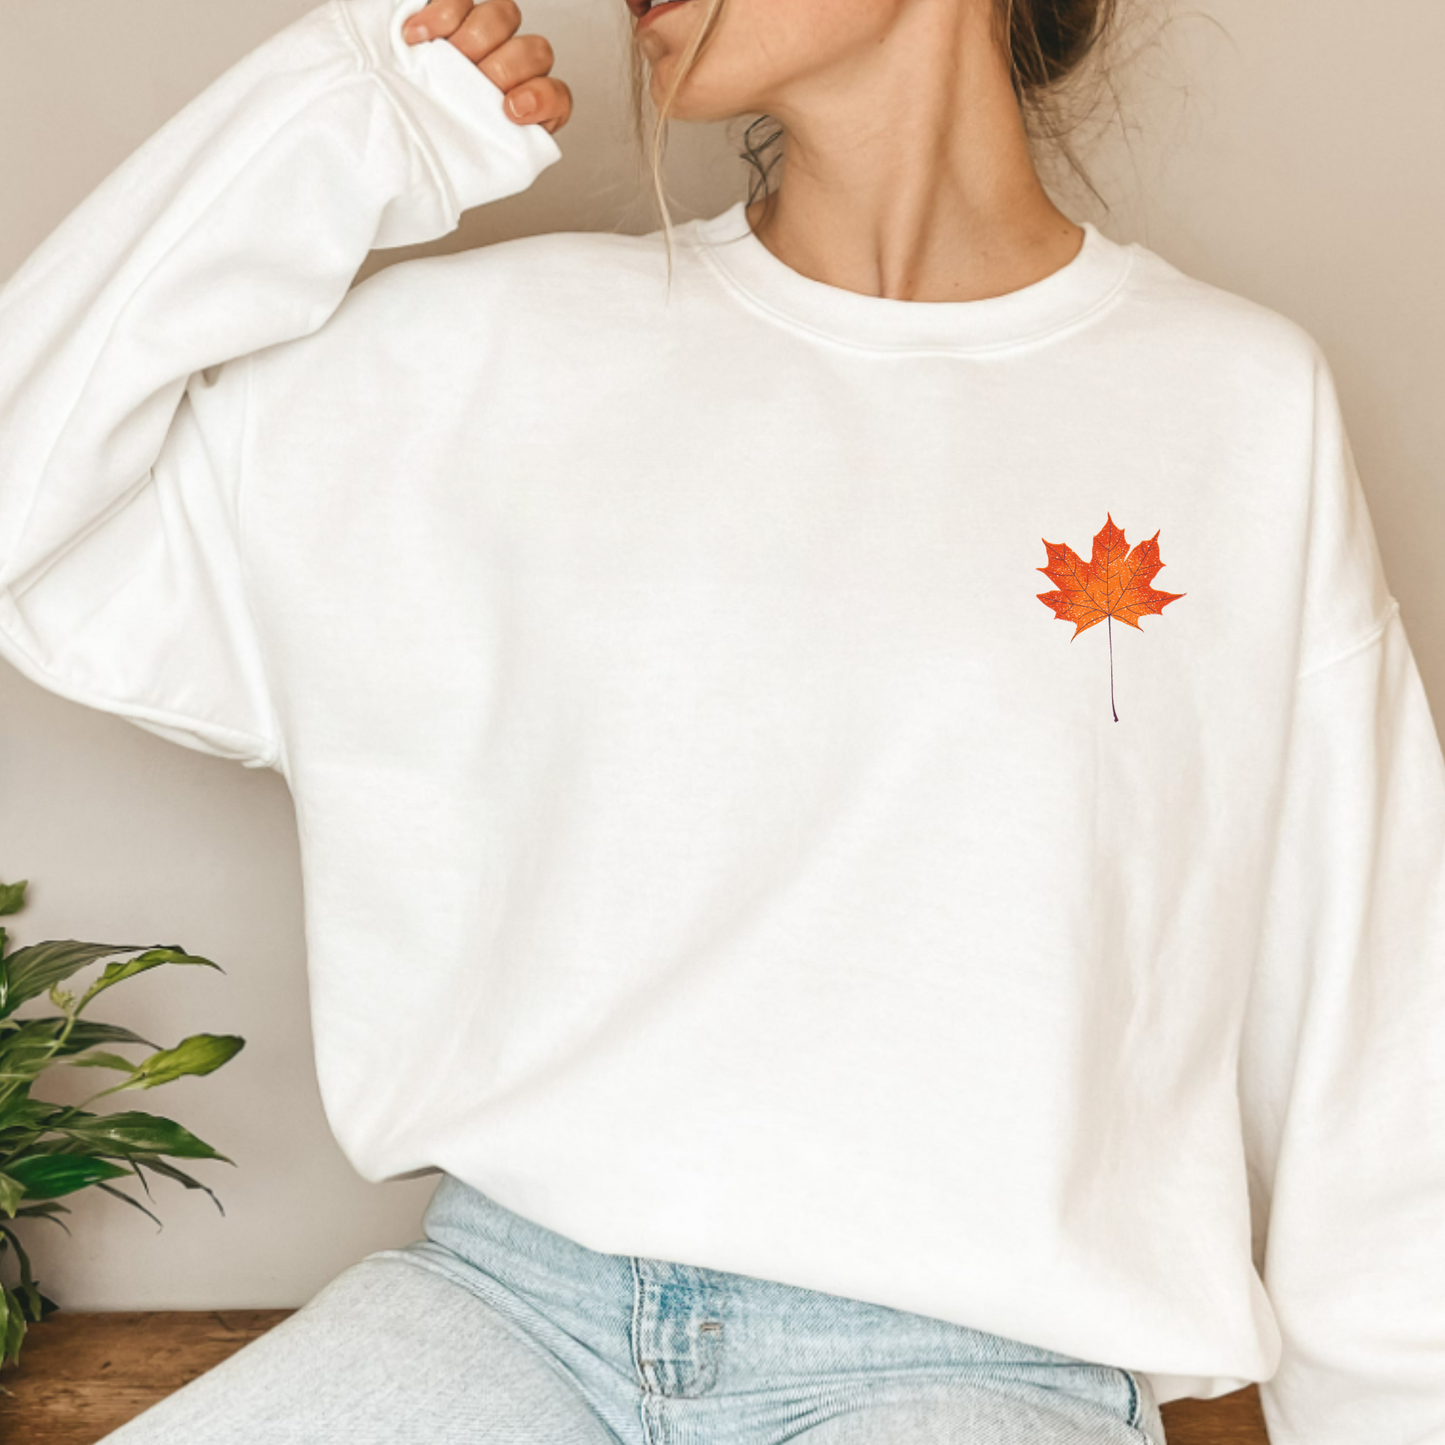 (Shirt not included) Fall Leaf POCKET - Clear Film Transfer